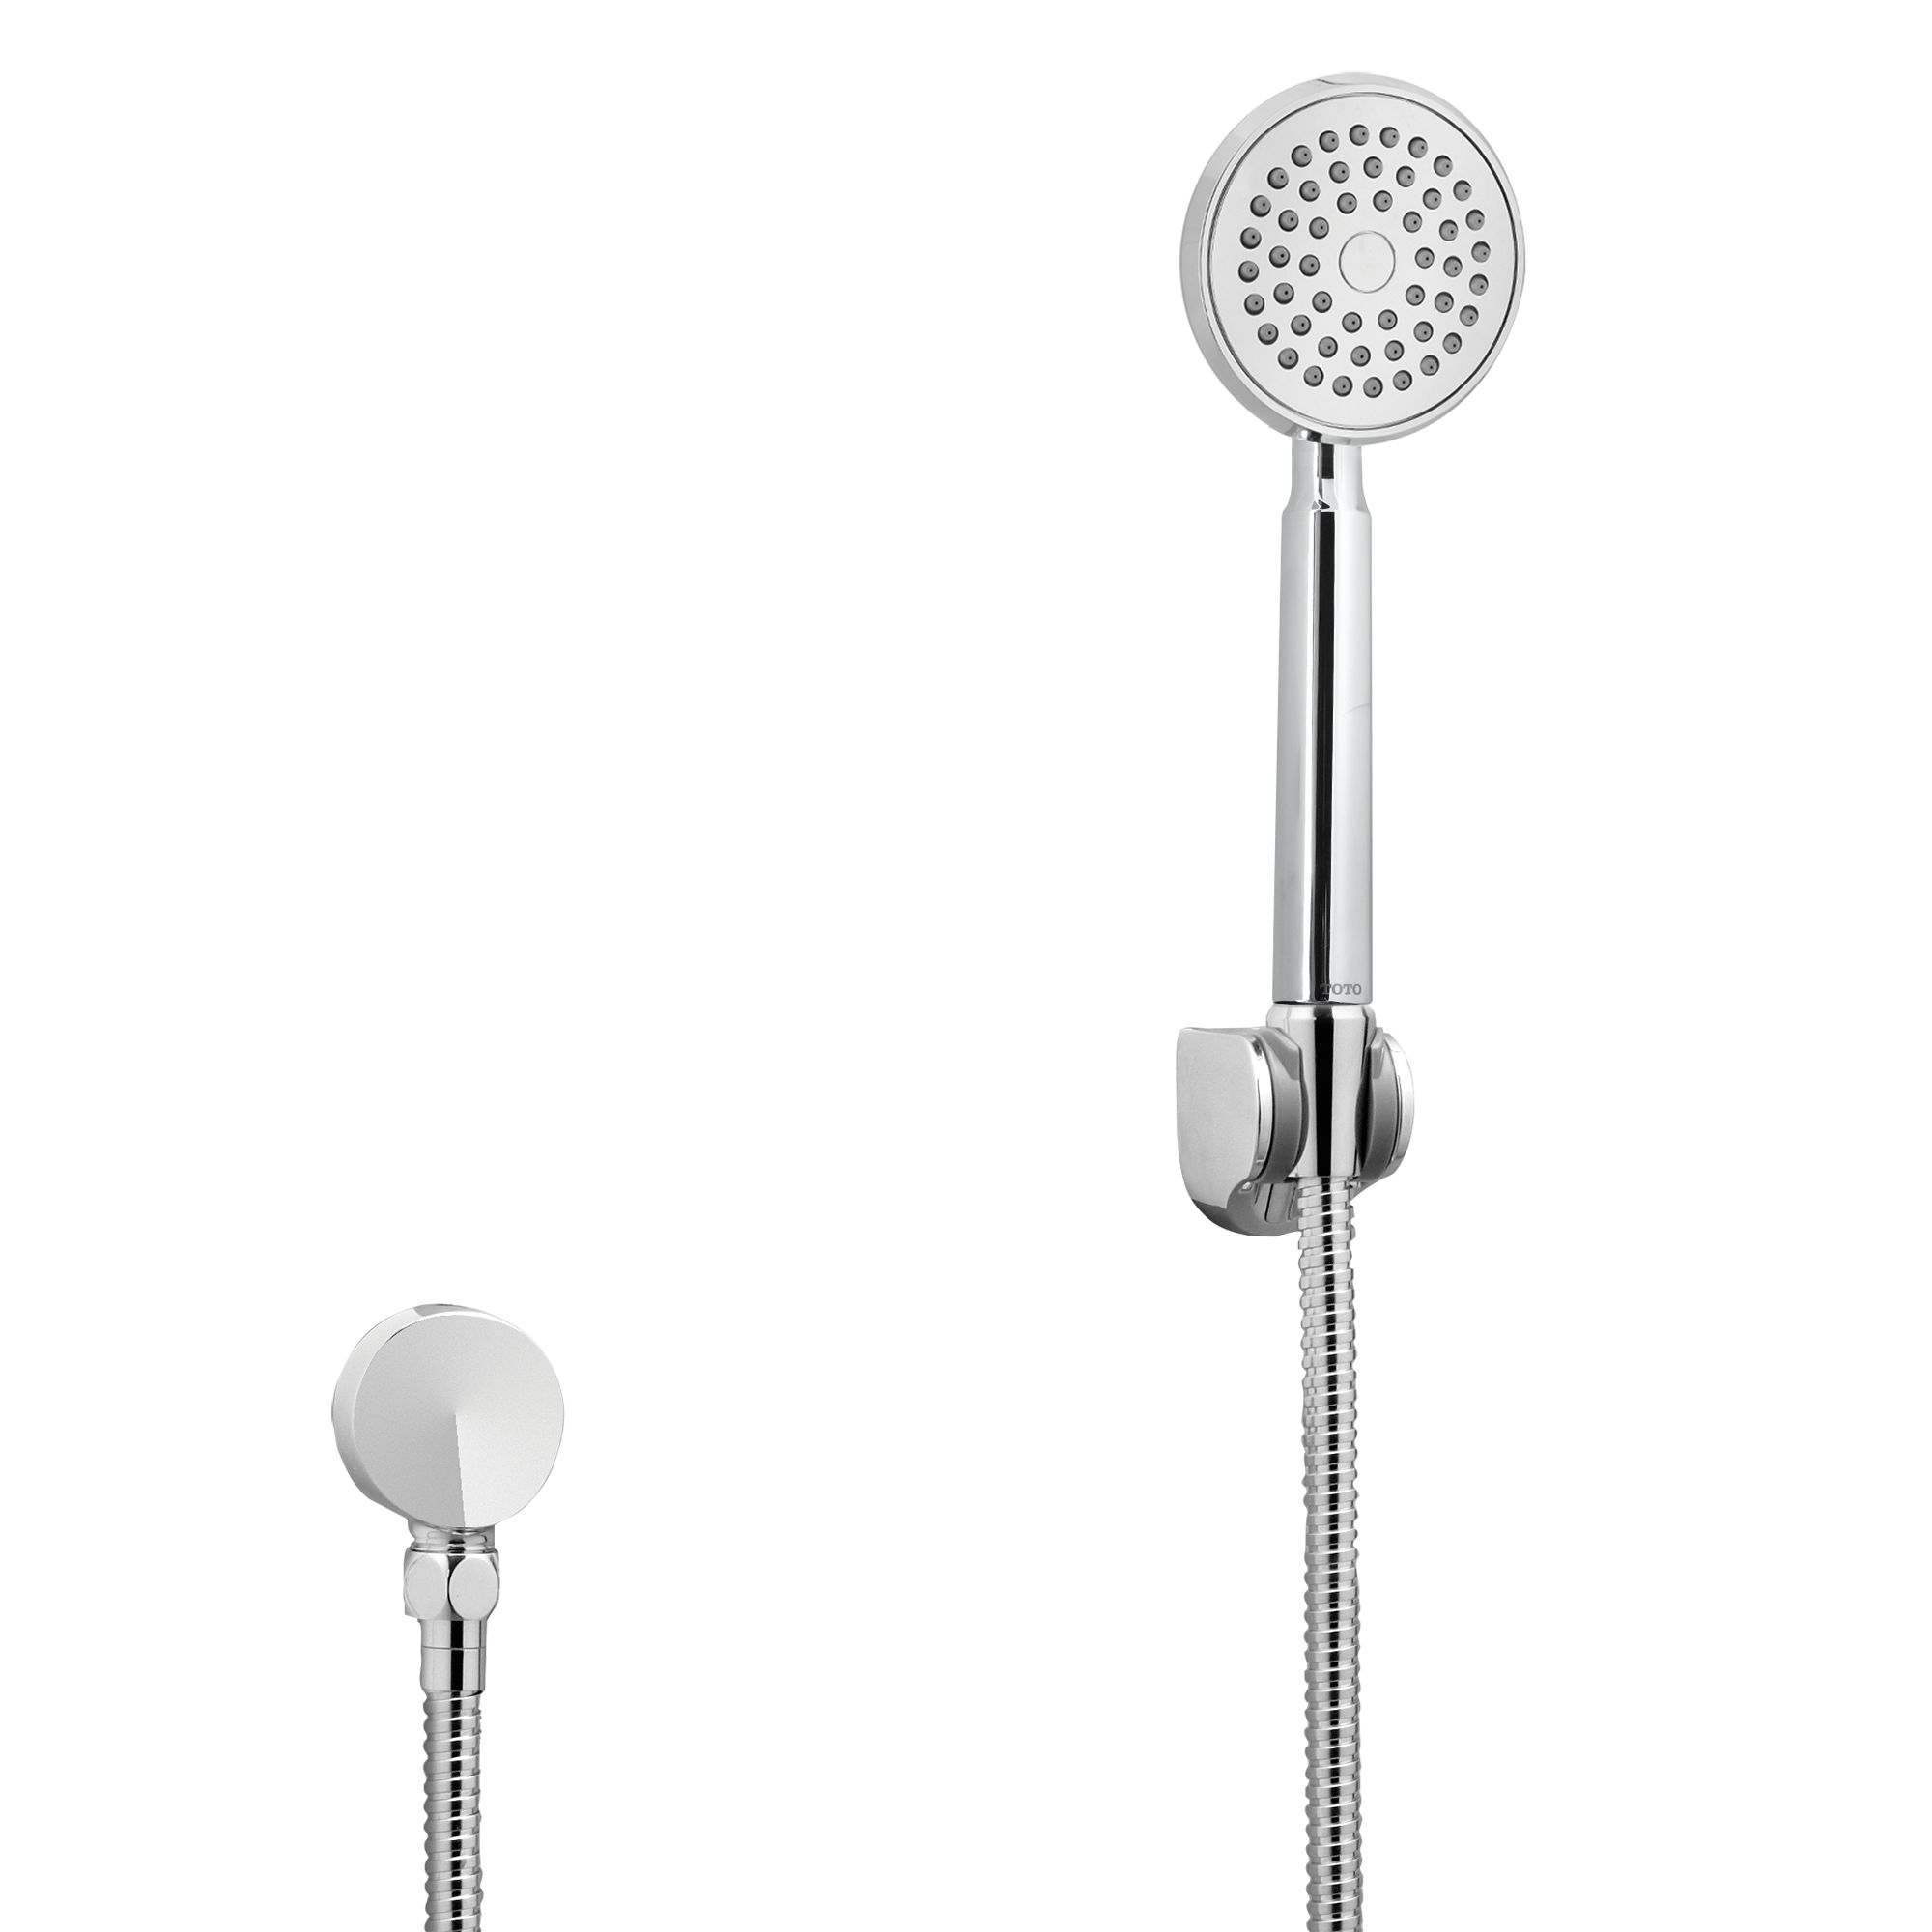 Transitional Collection Series B Single-Spray Handshower 4-1/2" - 2.0 gpm